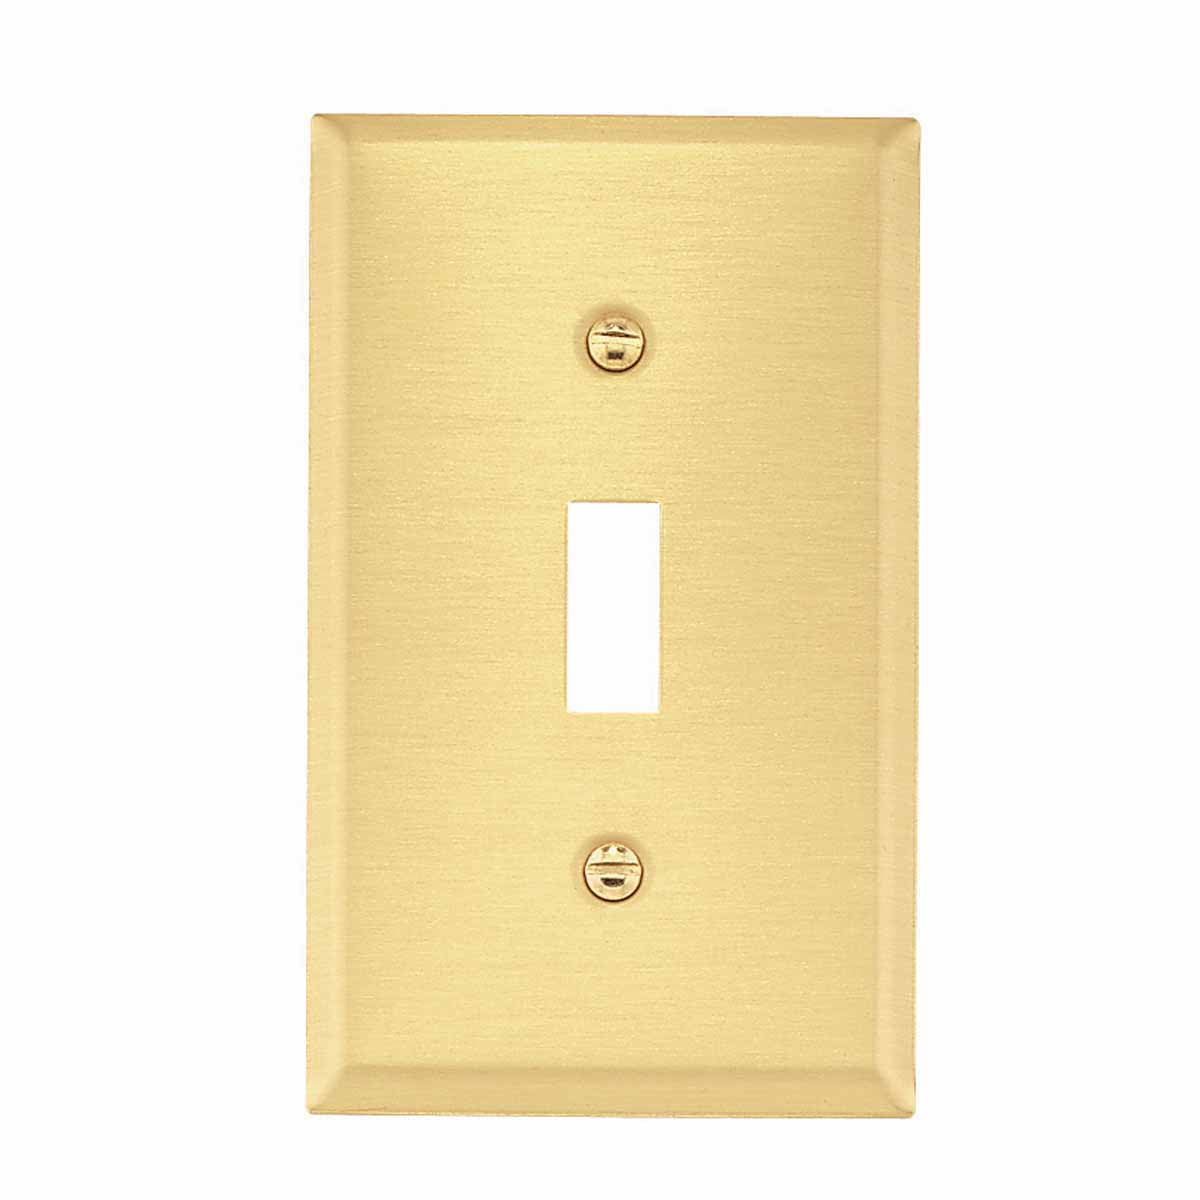 Angelo 3-Toggle Switch Metal Stamped Brass Finish Wall Plate